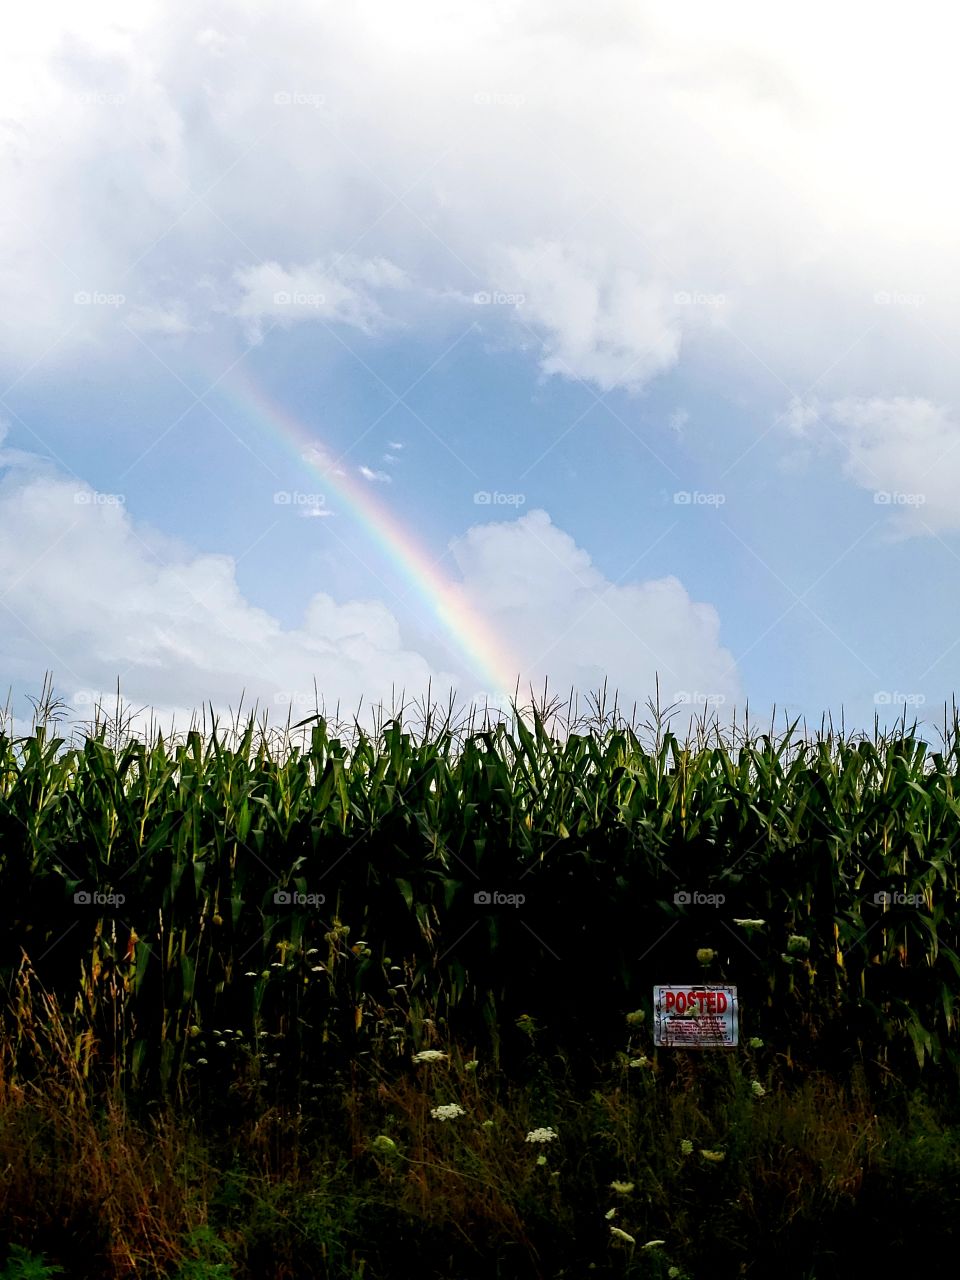 Pot of Gold in the cornfield?